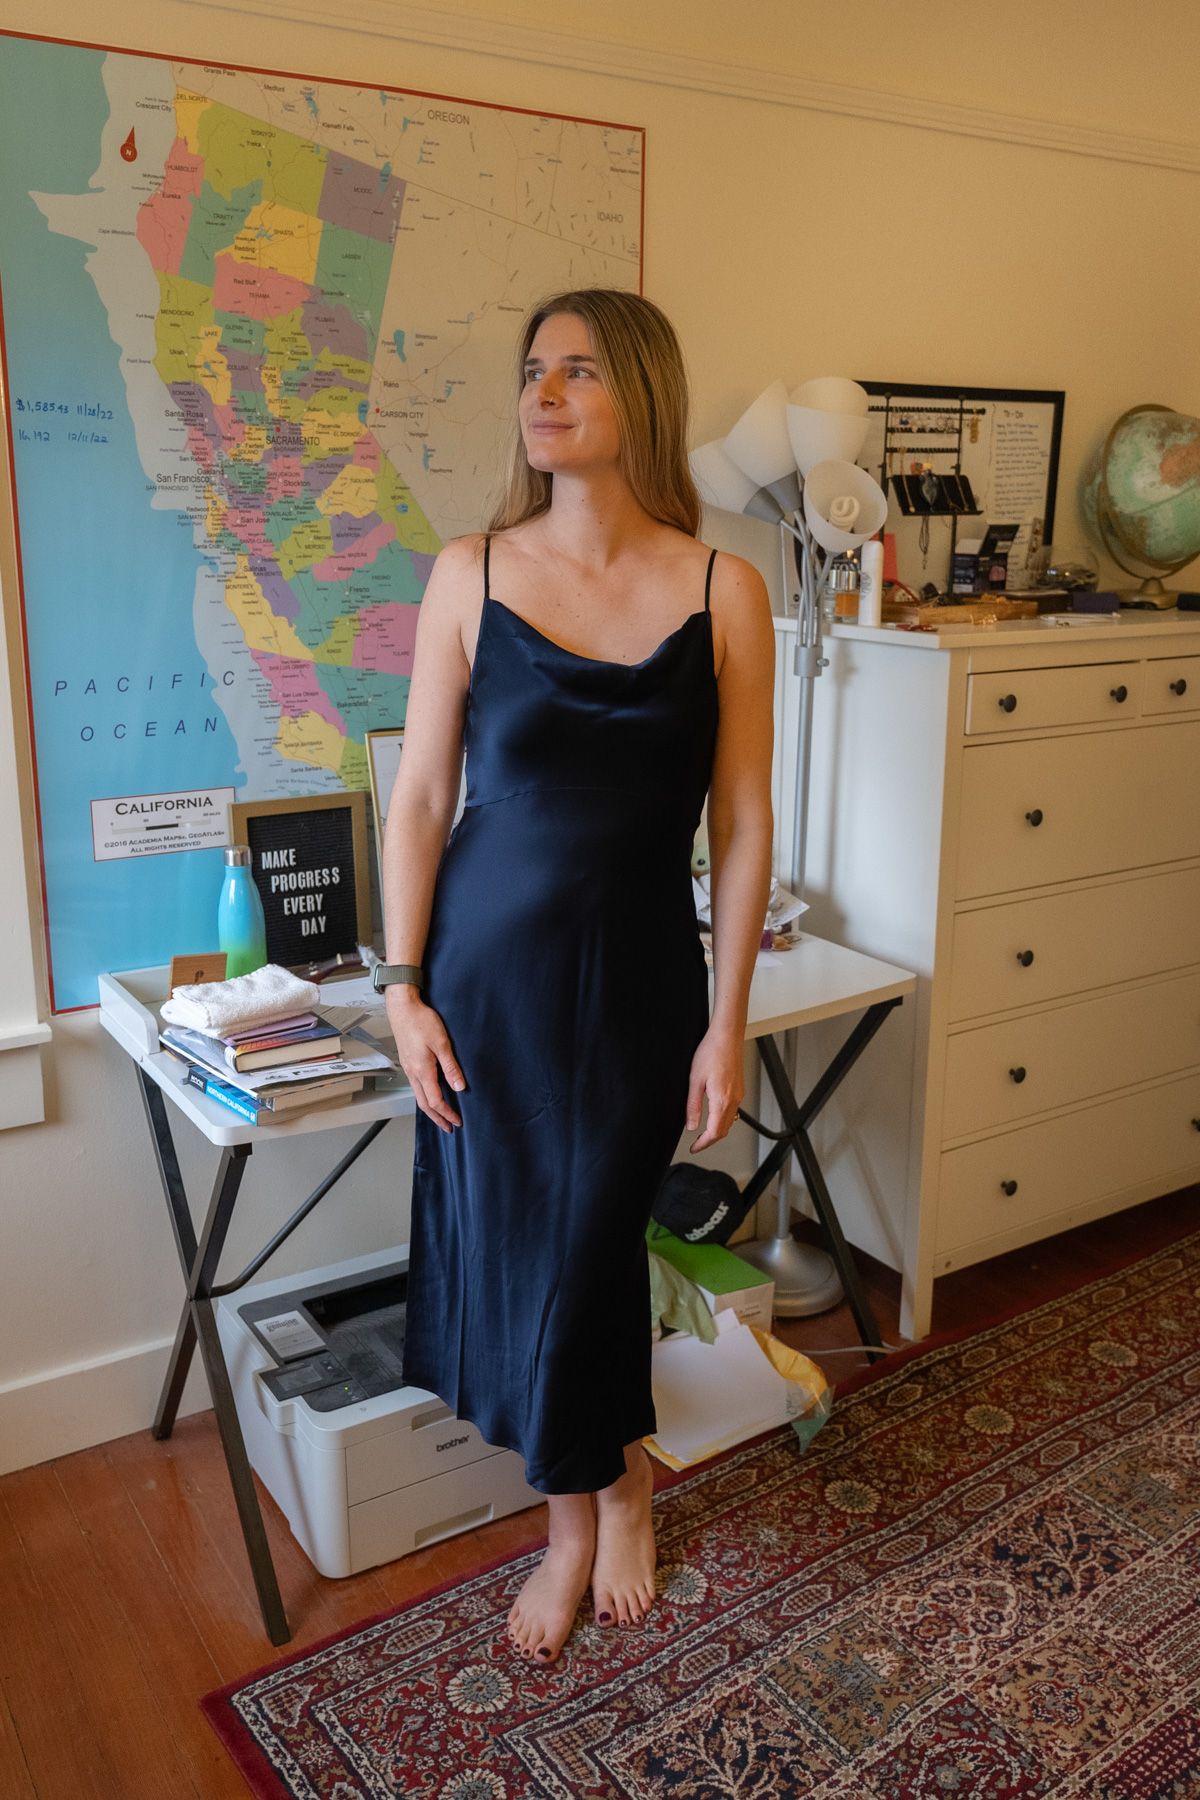 A young woman wearing a dark blue Silk Slip Dress stands looking over her right shoulder in an interior setting with a map of California on the wall behind her.